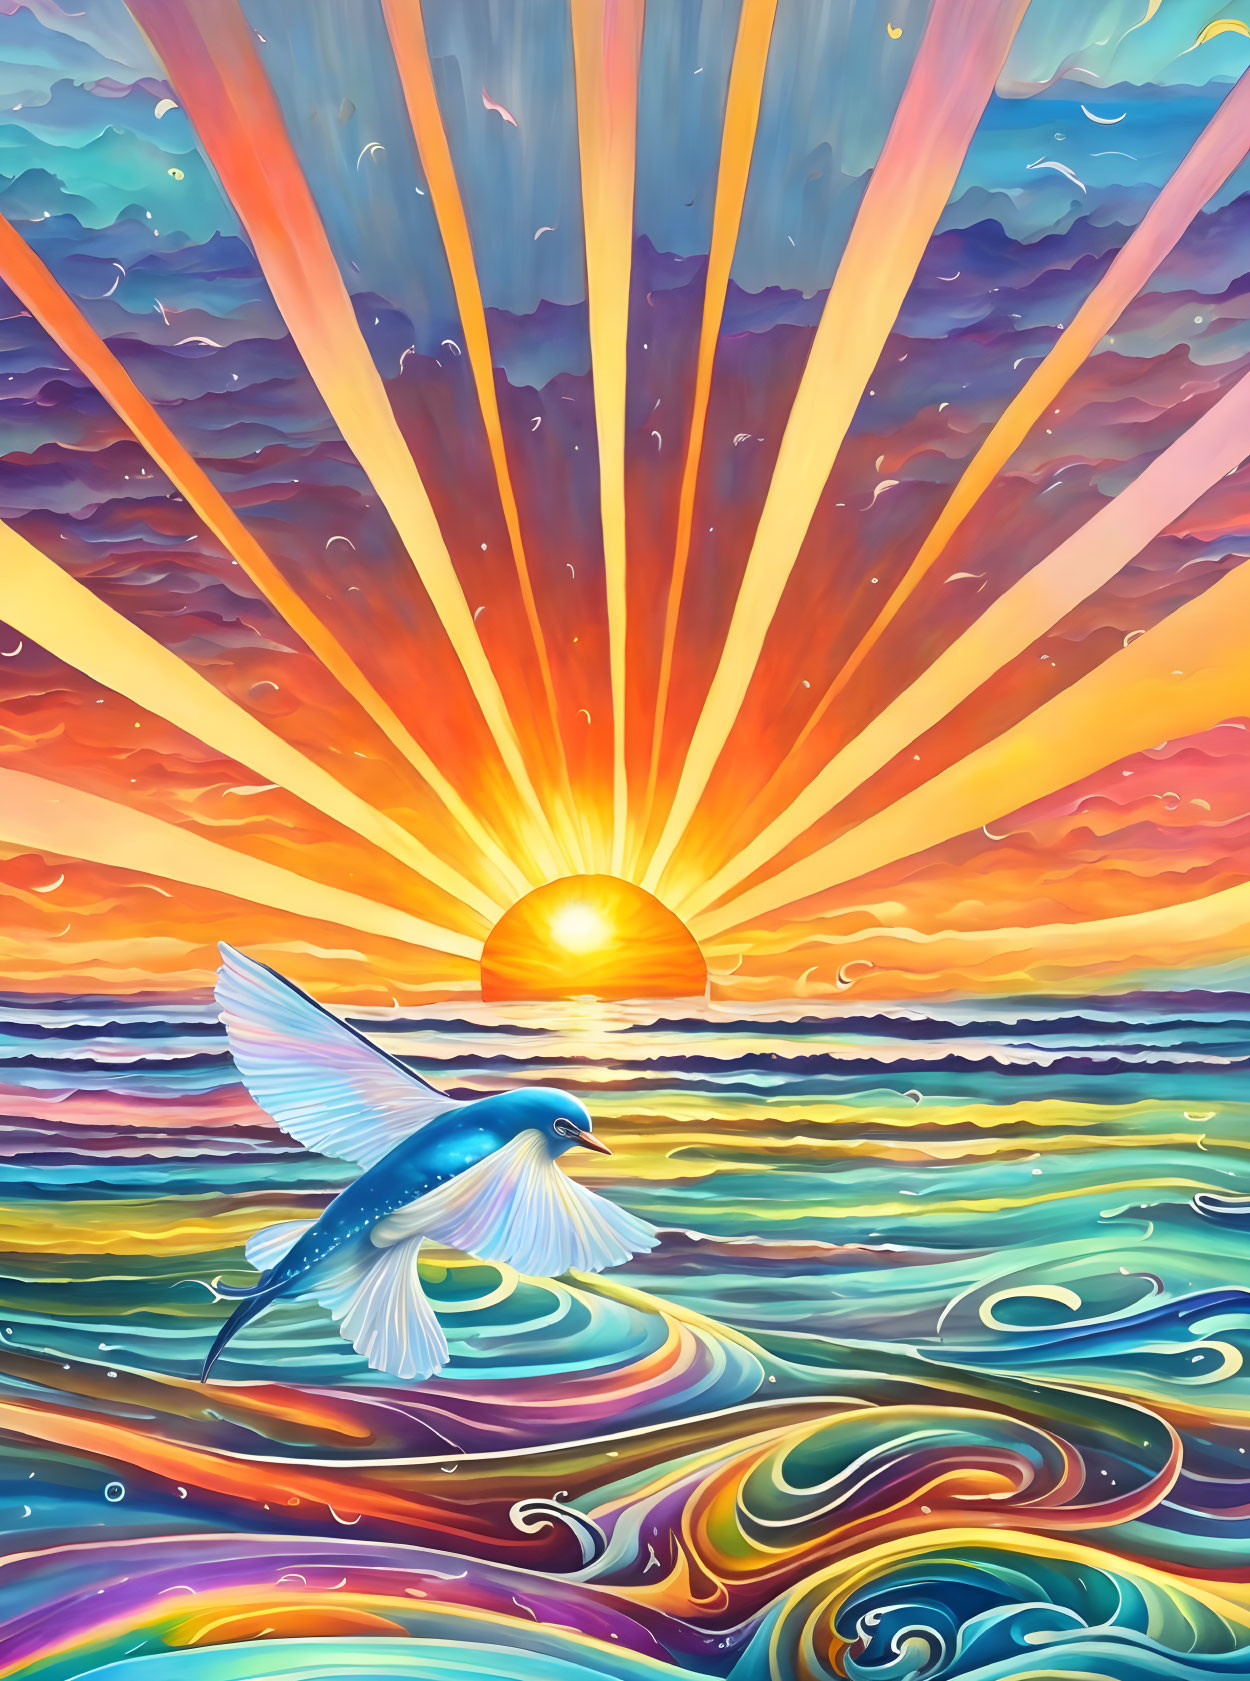 Colorful bird flying over vibrant sunset sea with swirling waves and rays.